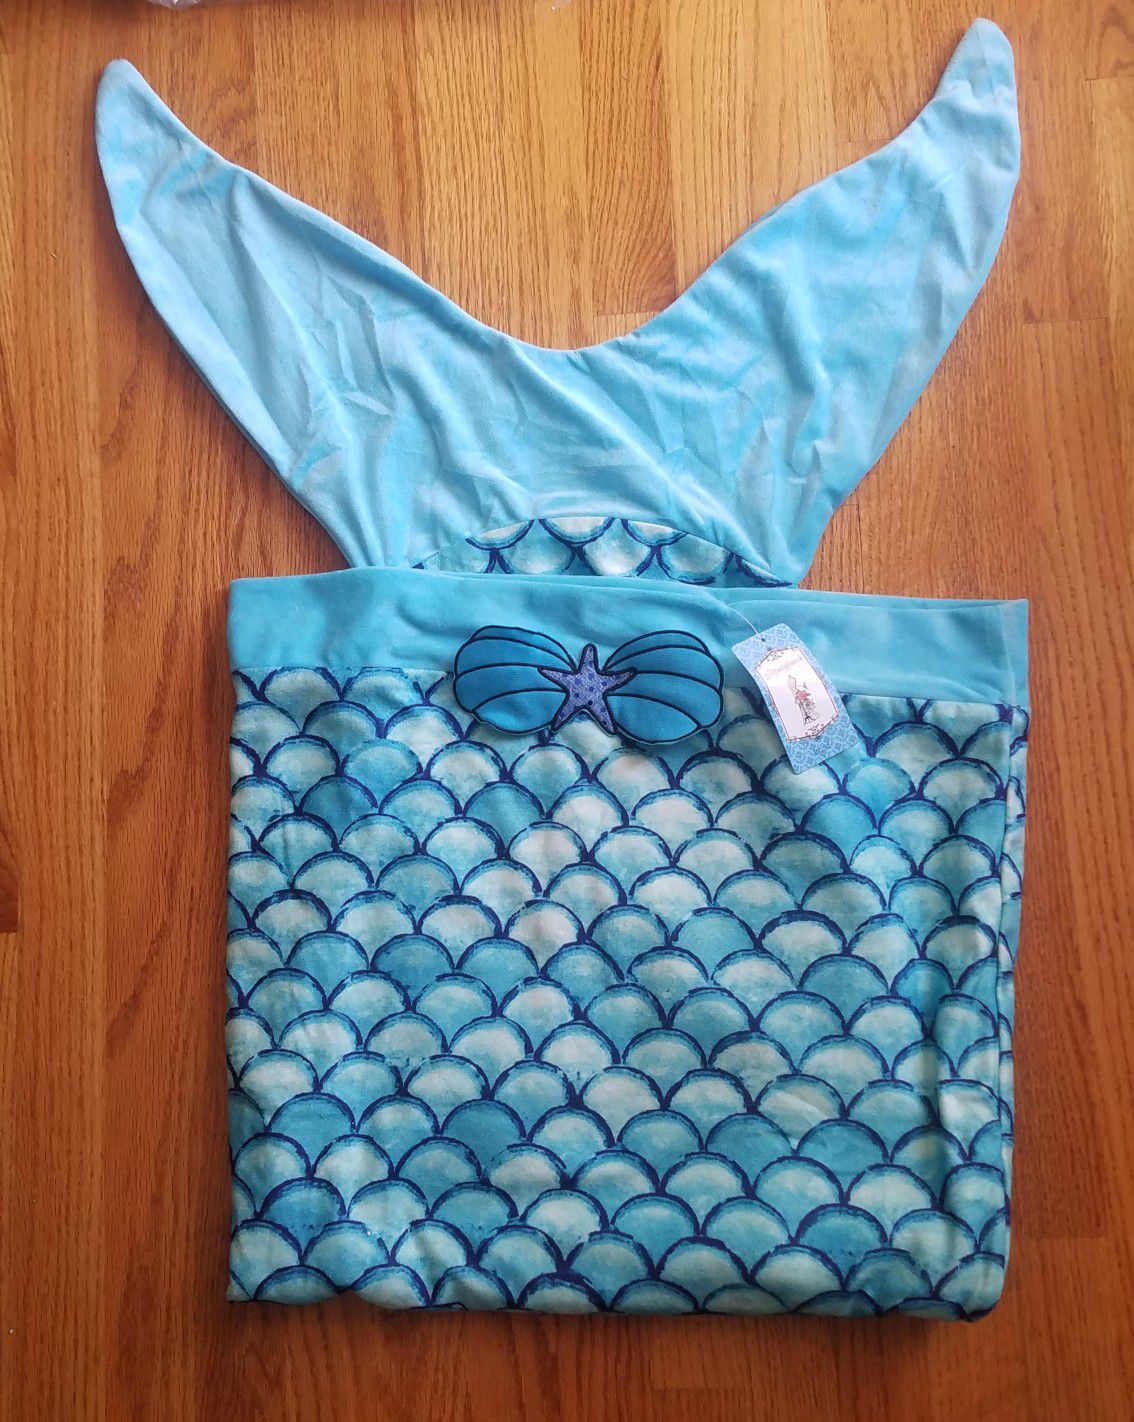 New with tags. Mermaid Tail Blanket